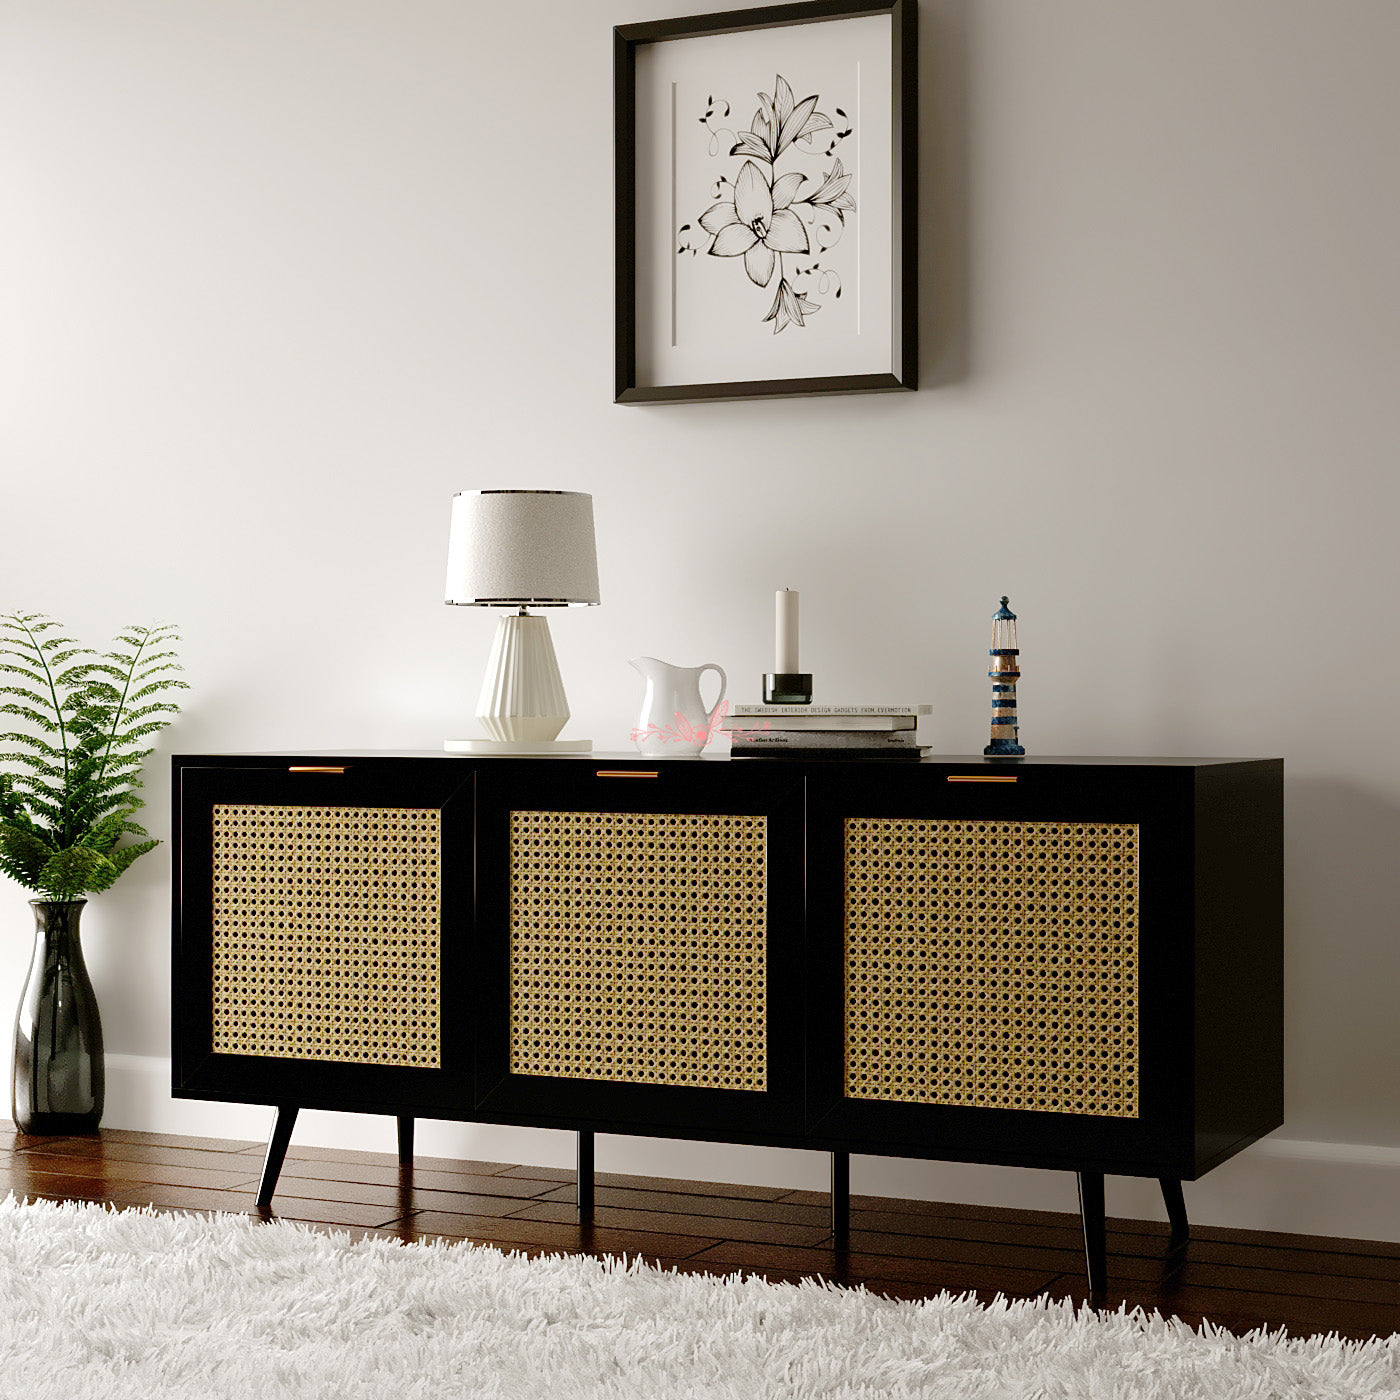 Rian Large 3 Door Sideboard - Black With Natural Cane Front Casa Maria Designs 